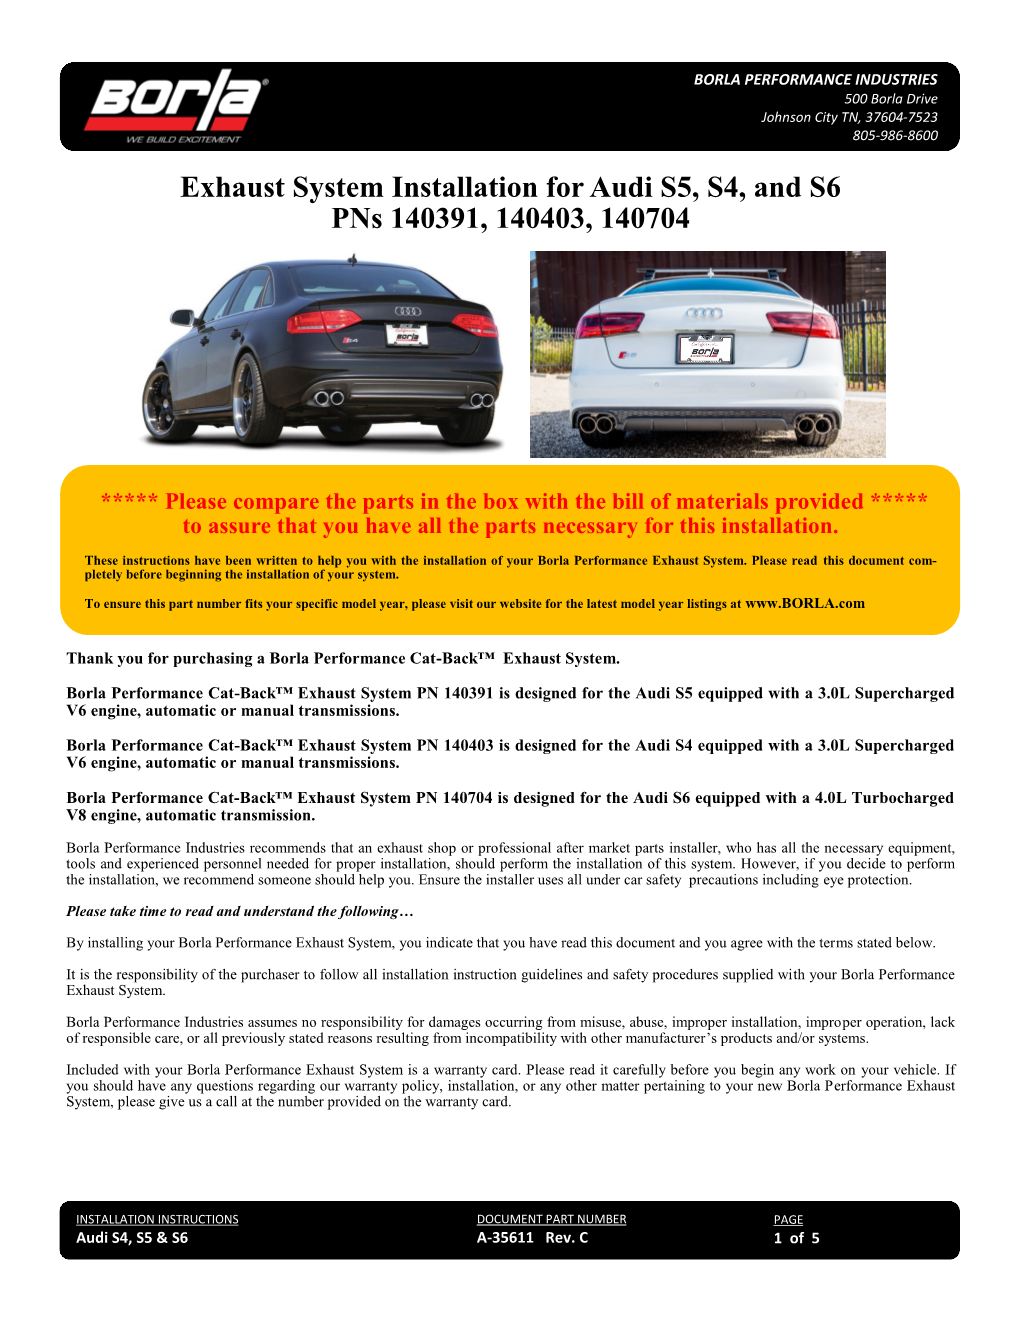 Exhaust System Installation for Audi S5, S4, and S6 Pns 140391, 140403, 140704